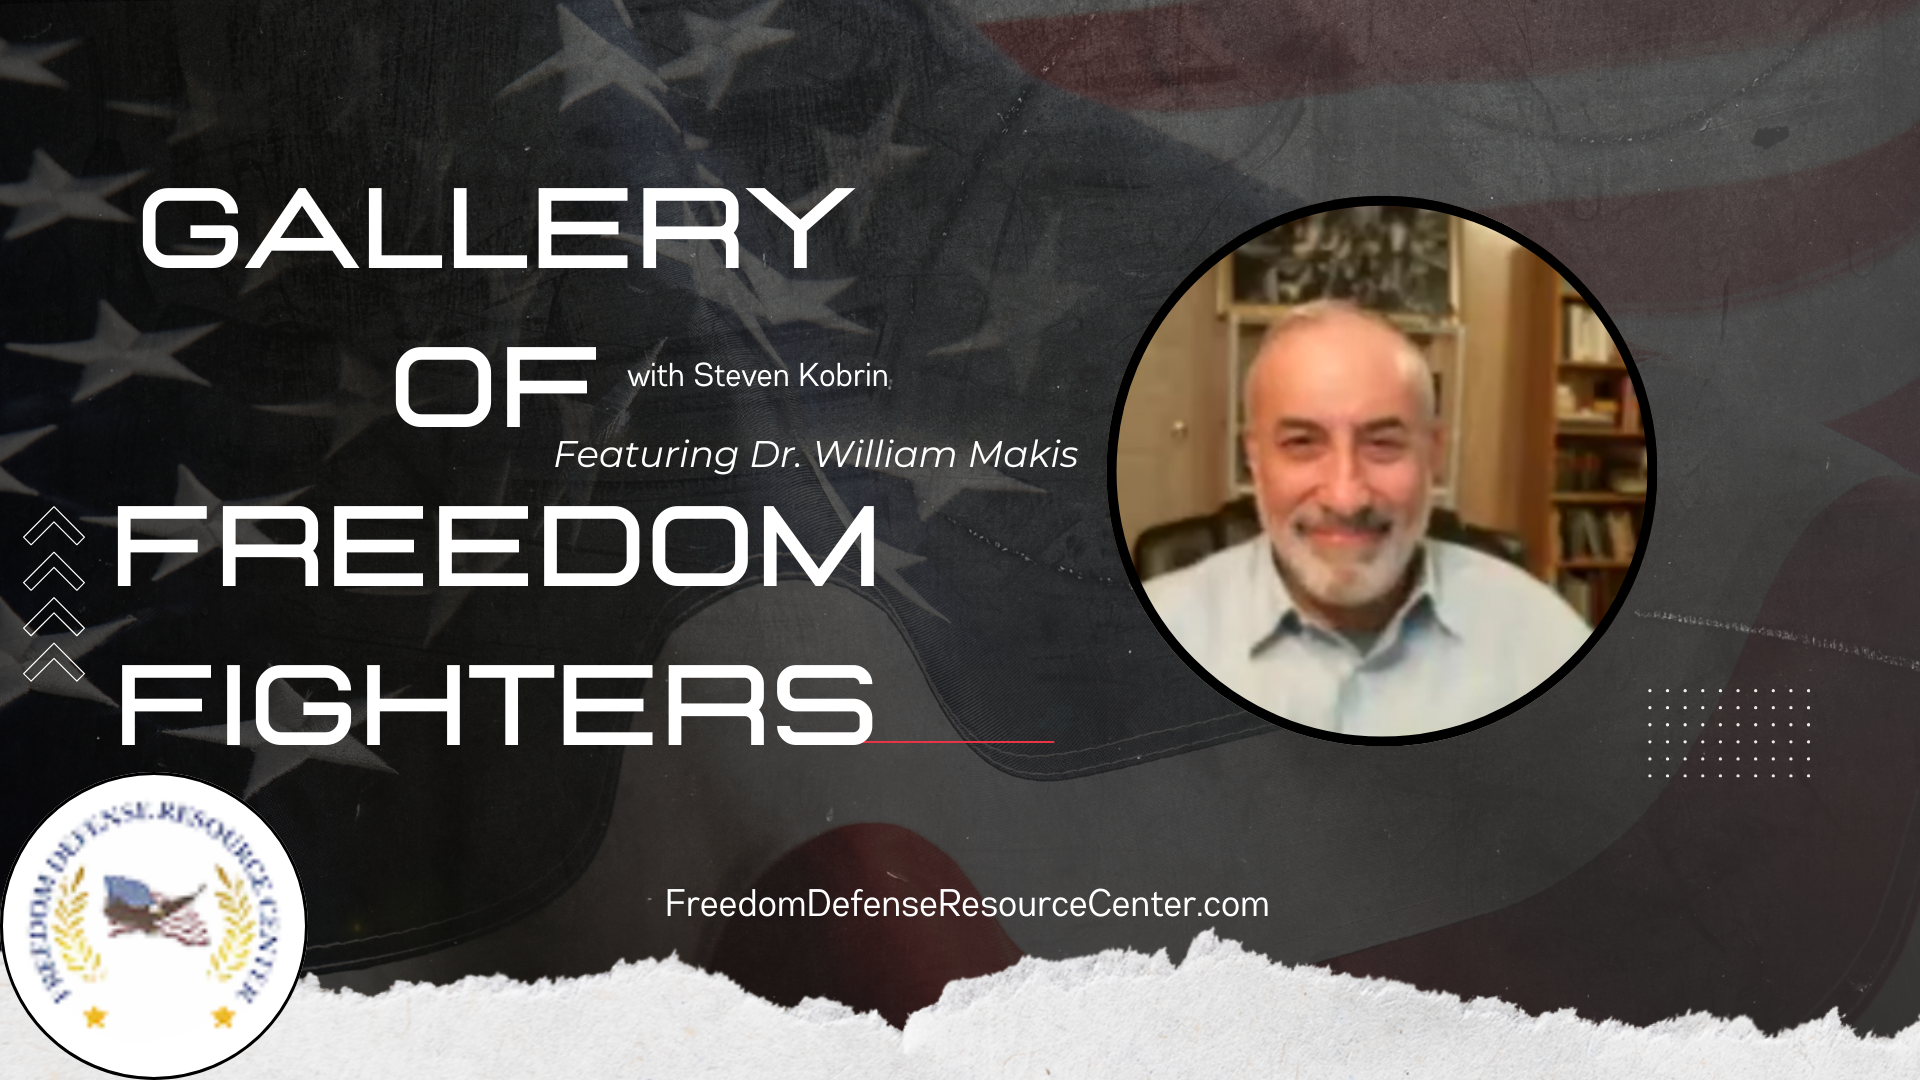 GFF65-Dr. William Makis - Gallery of Freedom Fighters